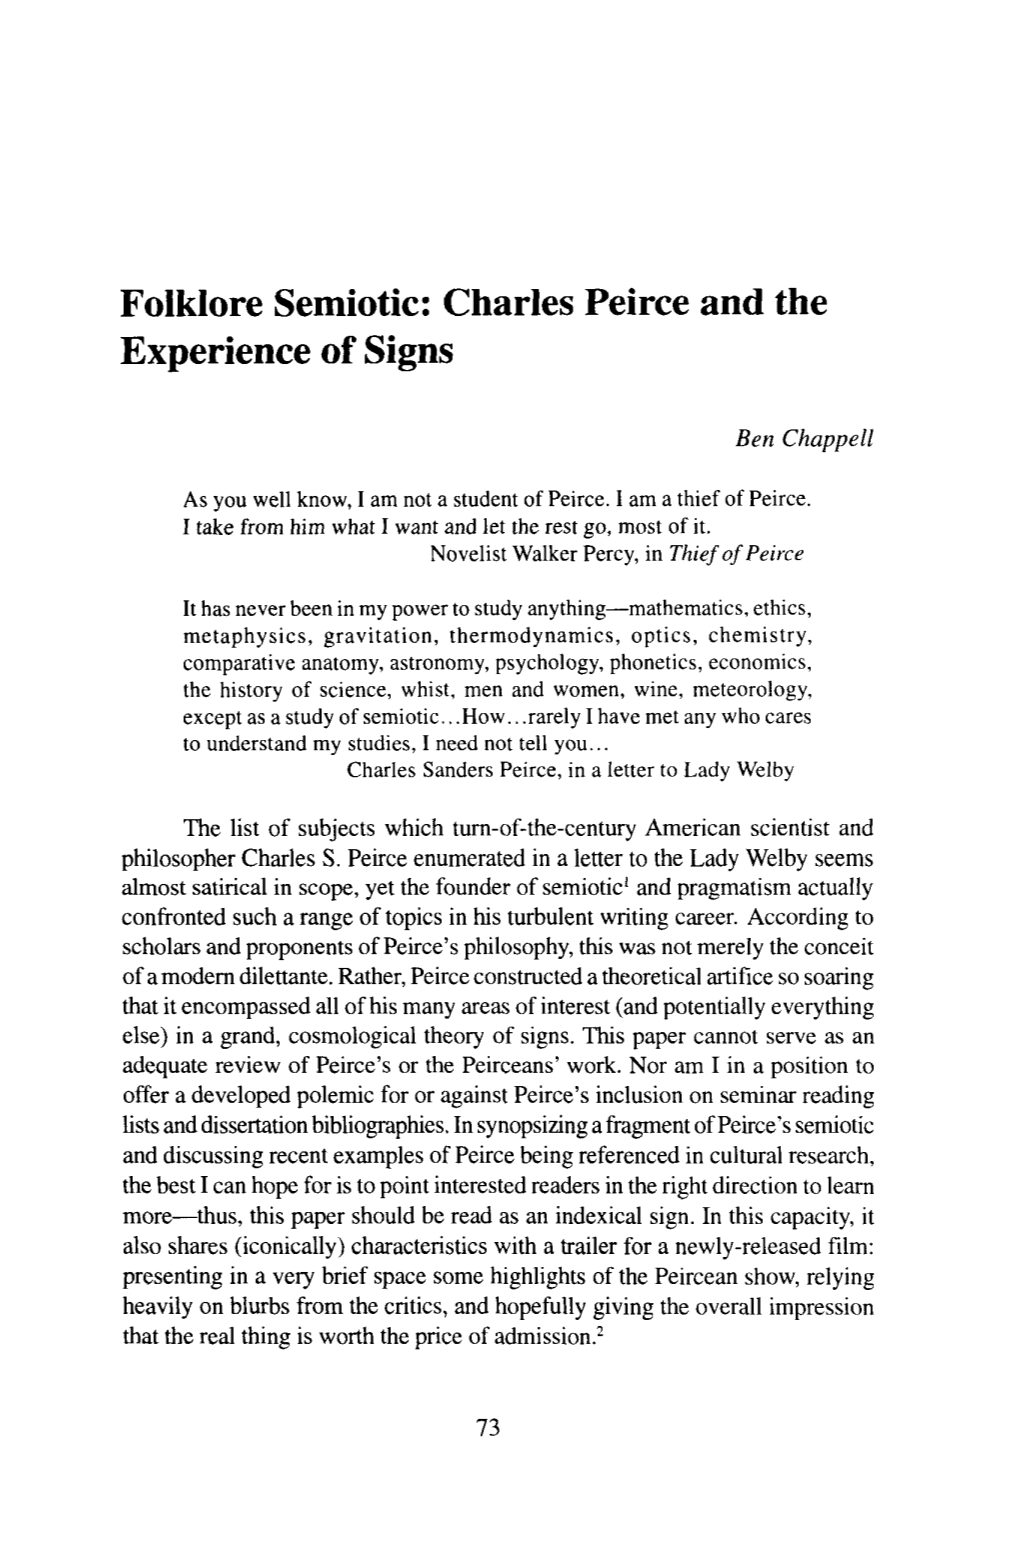 Folklore Semiotic: Charles Peirce and the Experience of Signs